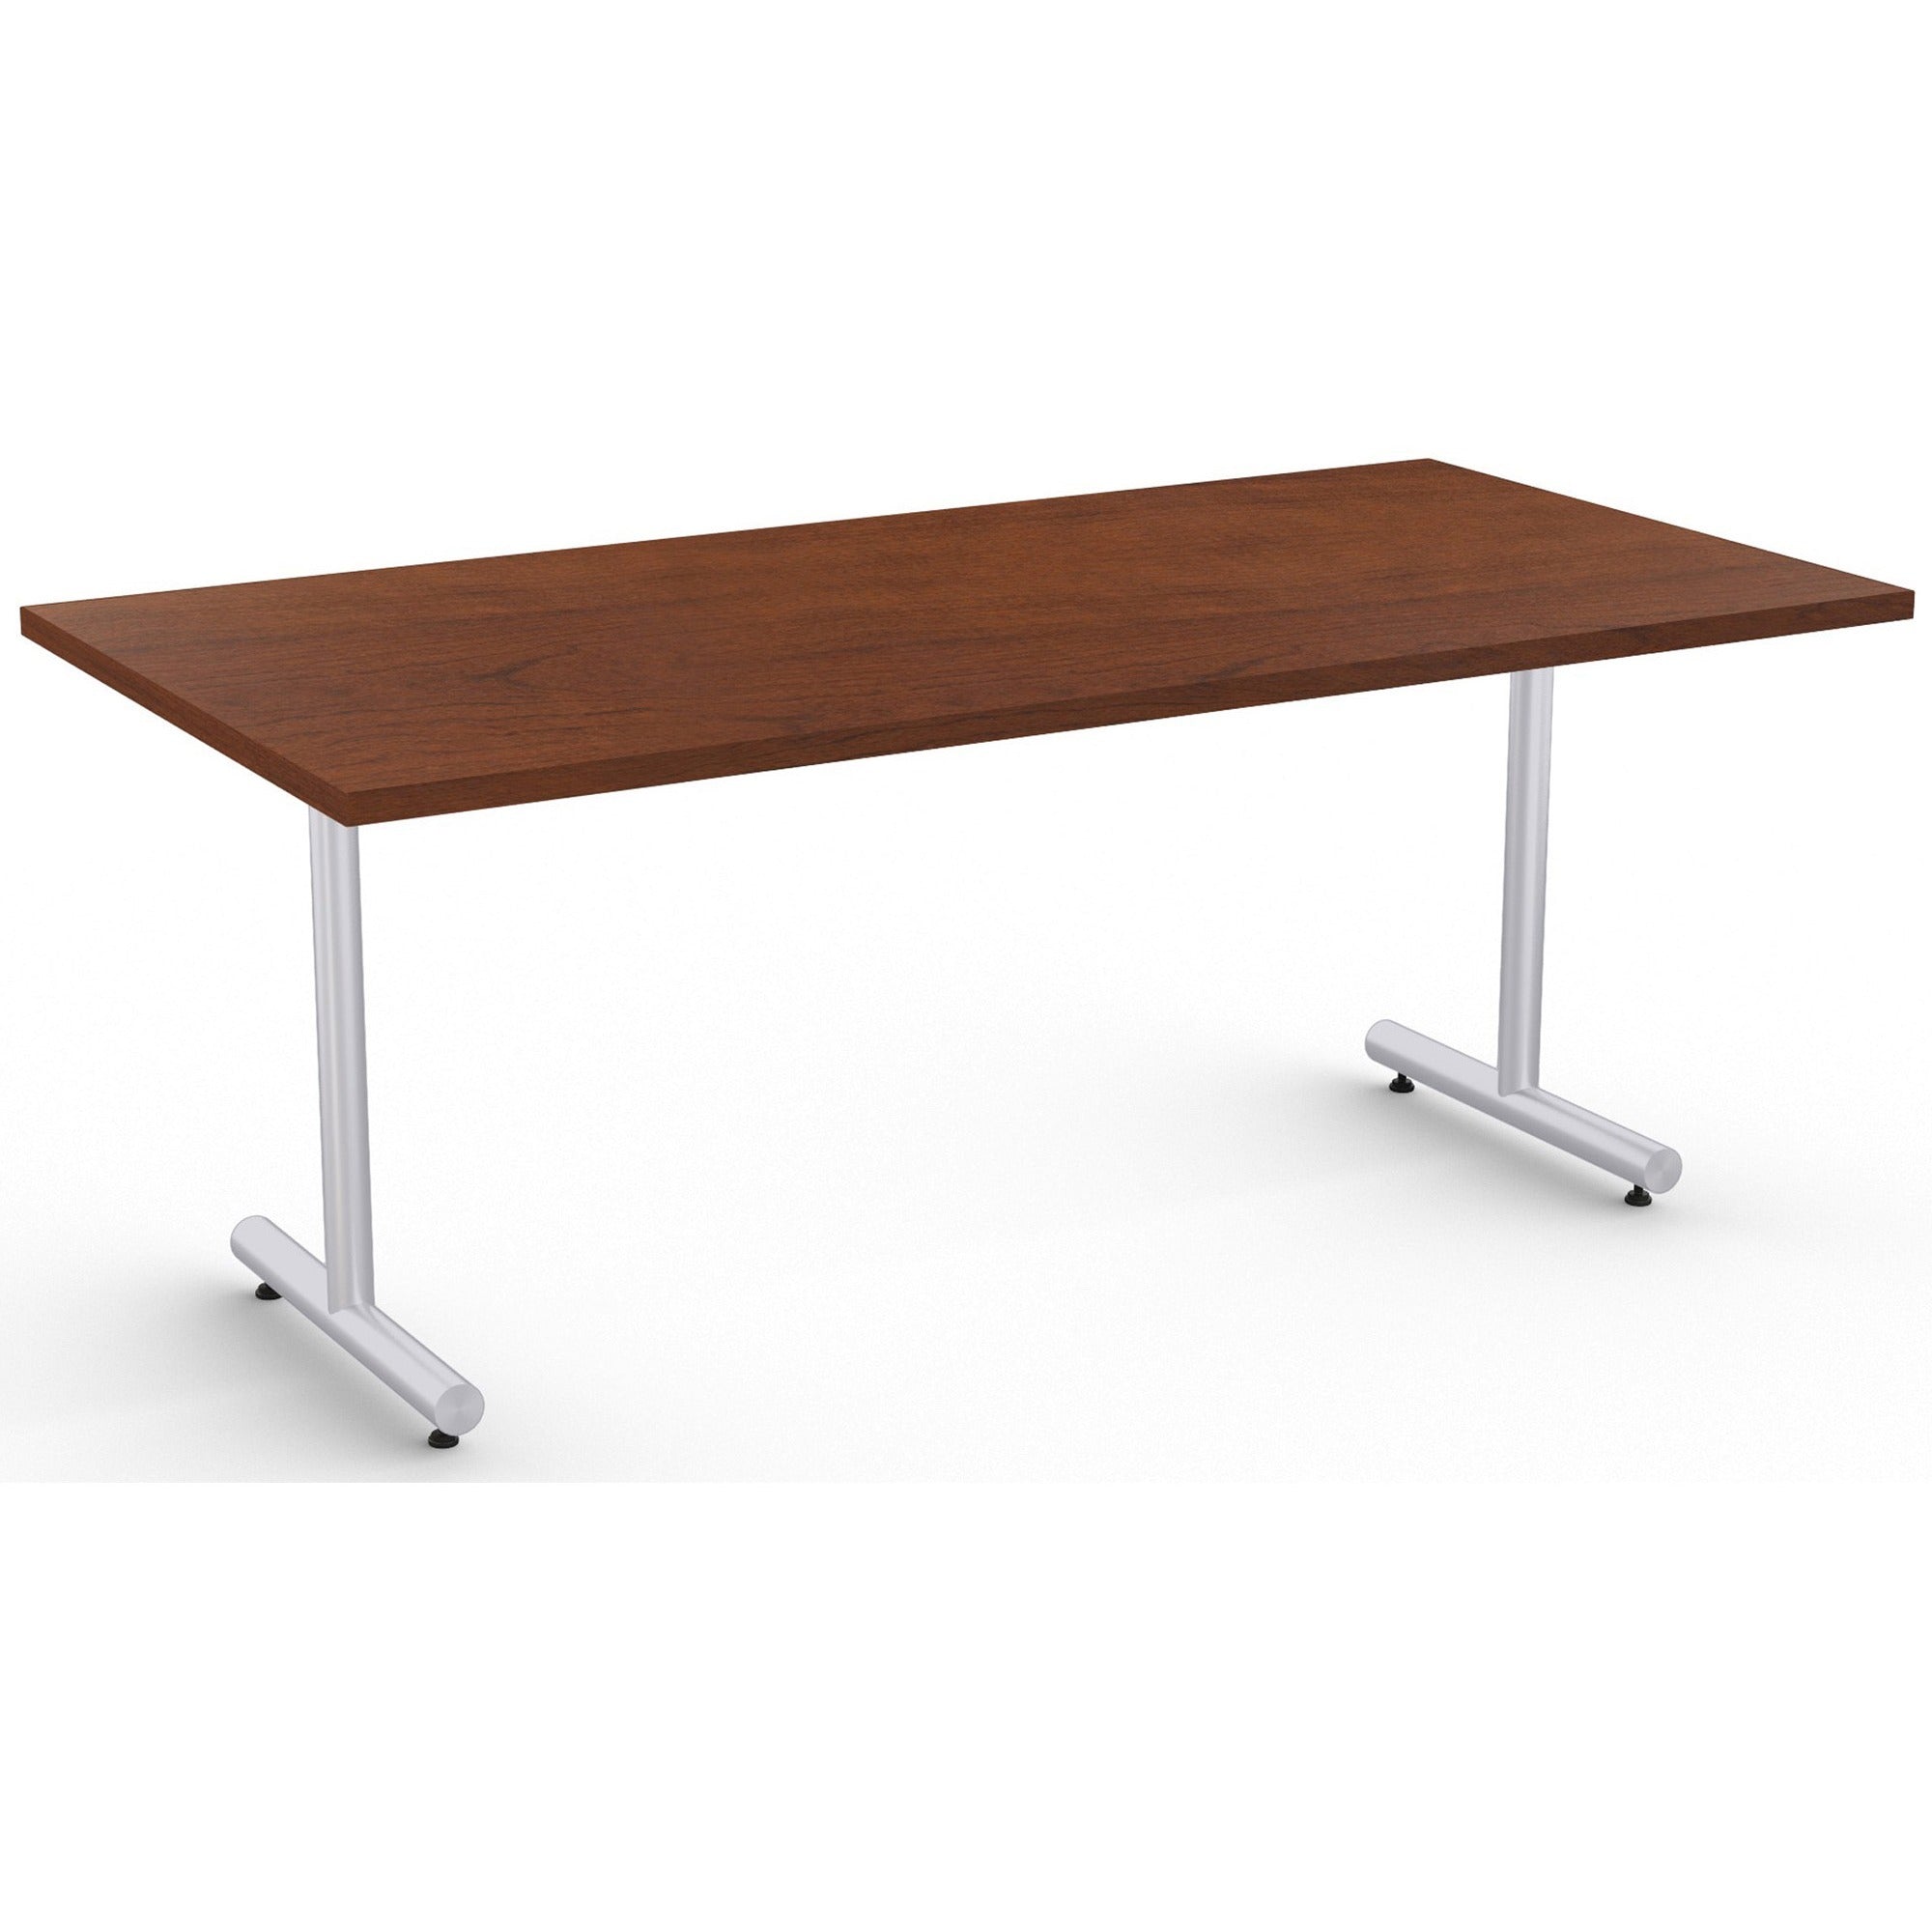 special-t-kingston-training-table-component-for-table-topmahogany-rectangle-top-metallic-sand-t-shaped-base-72-table-top-length-x-30-table-top-width-29-height-assembly-required-thermofused-laminate-tfl-top-material-1-each_sctking3072smg - 1